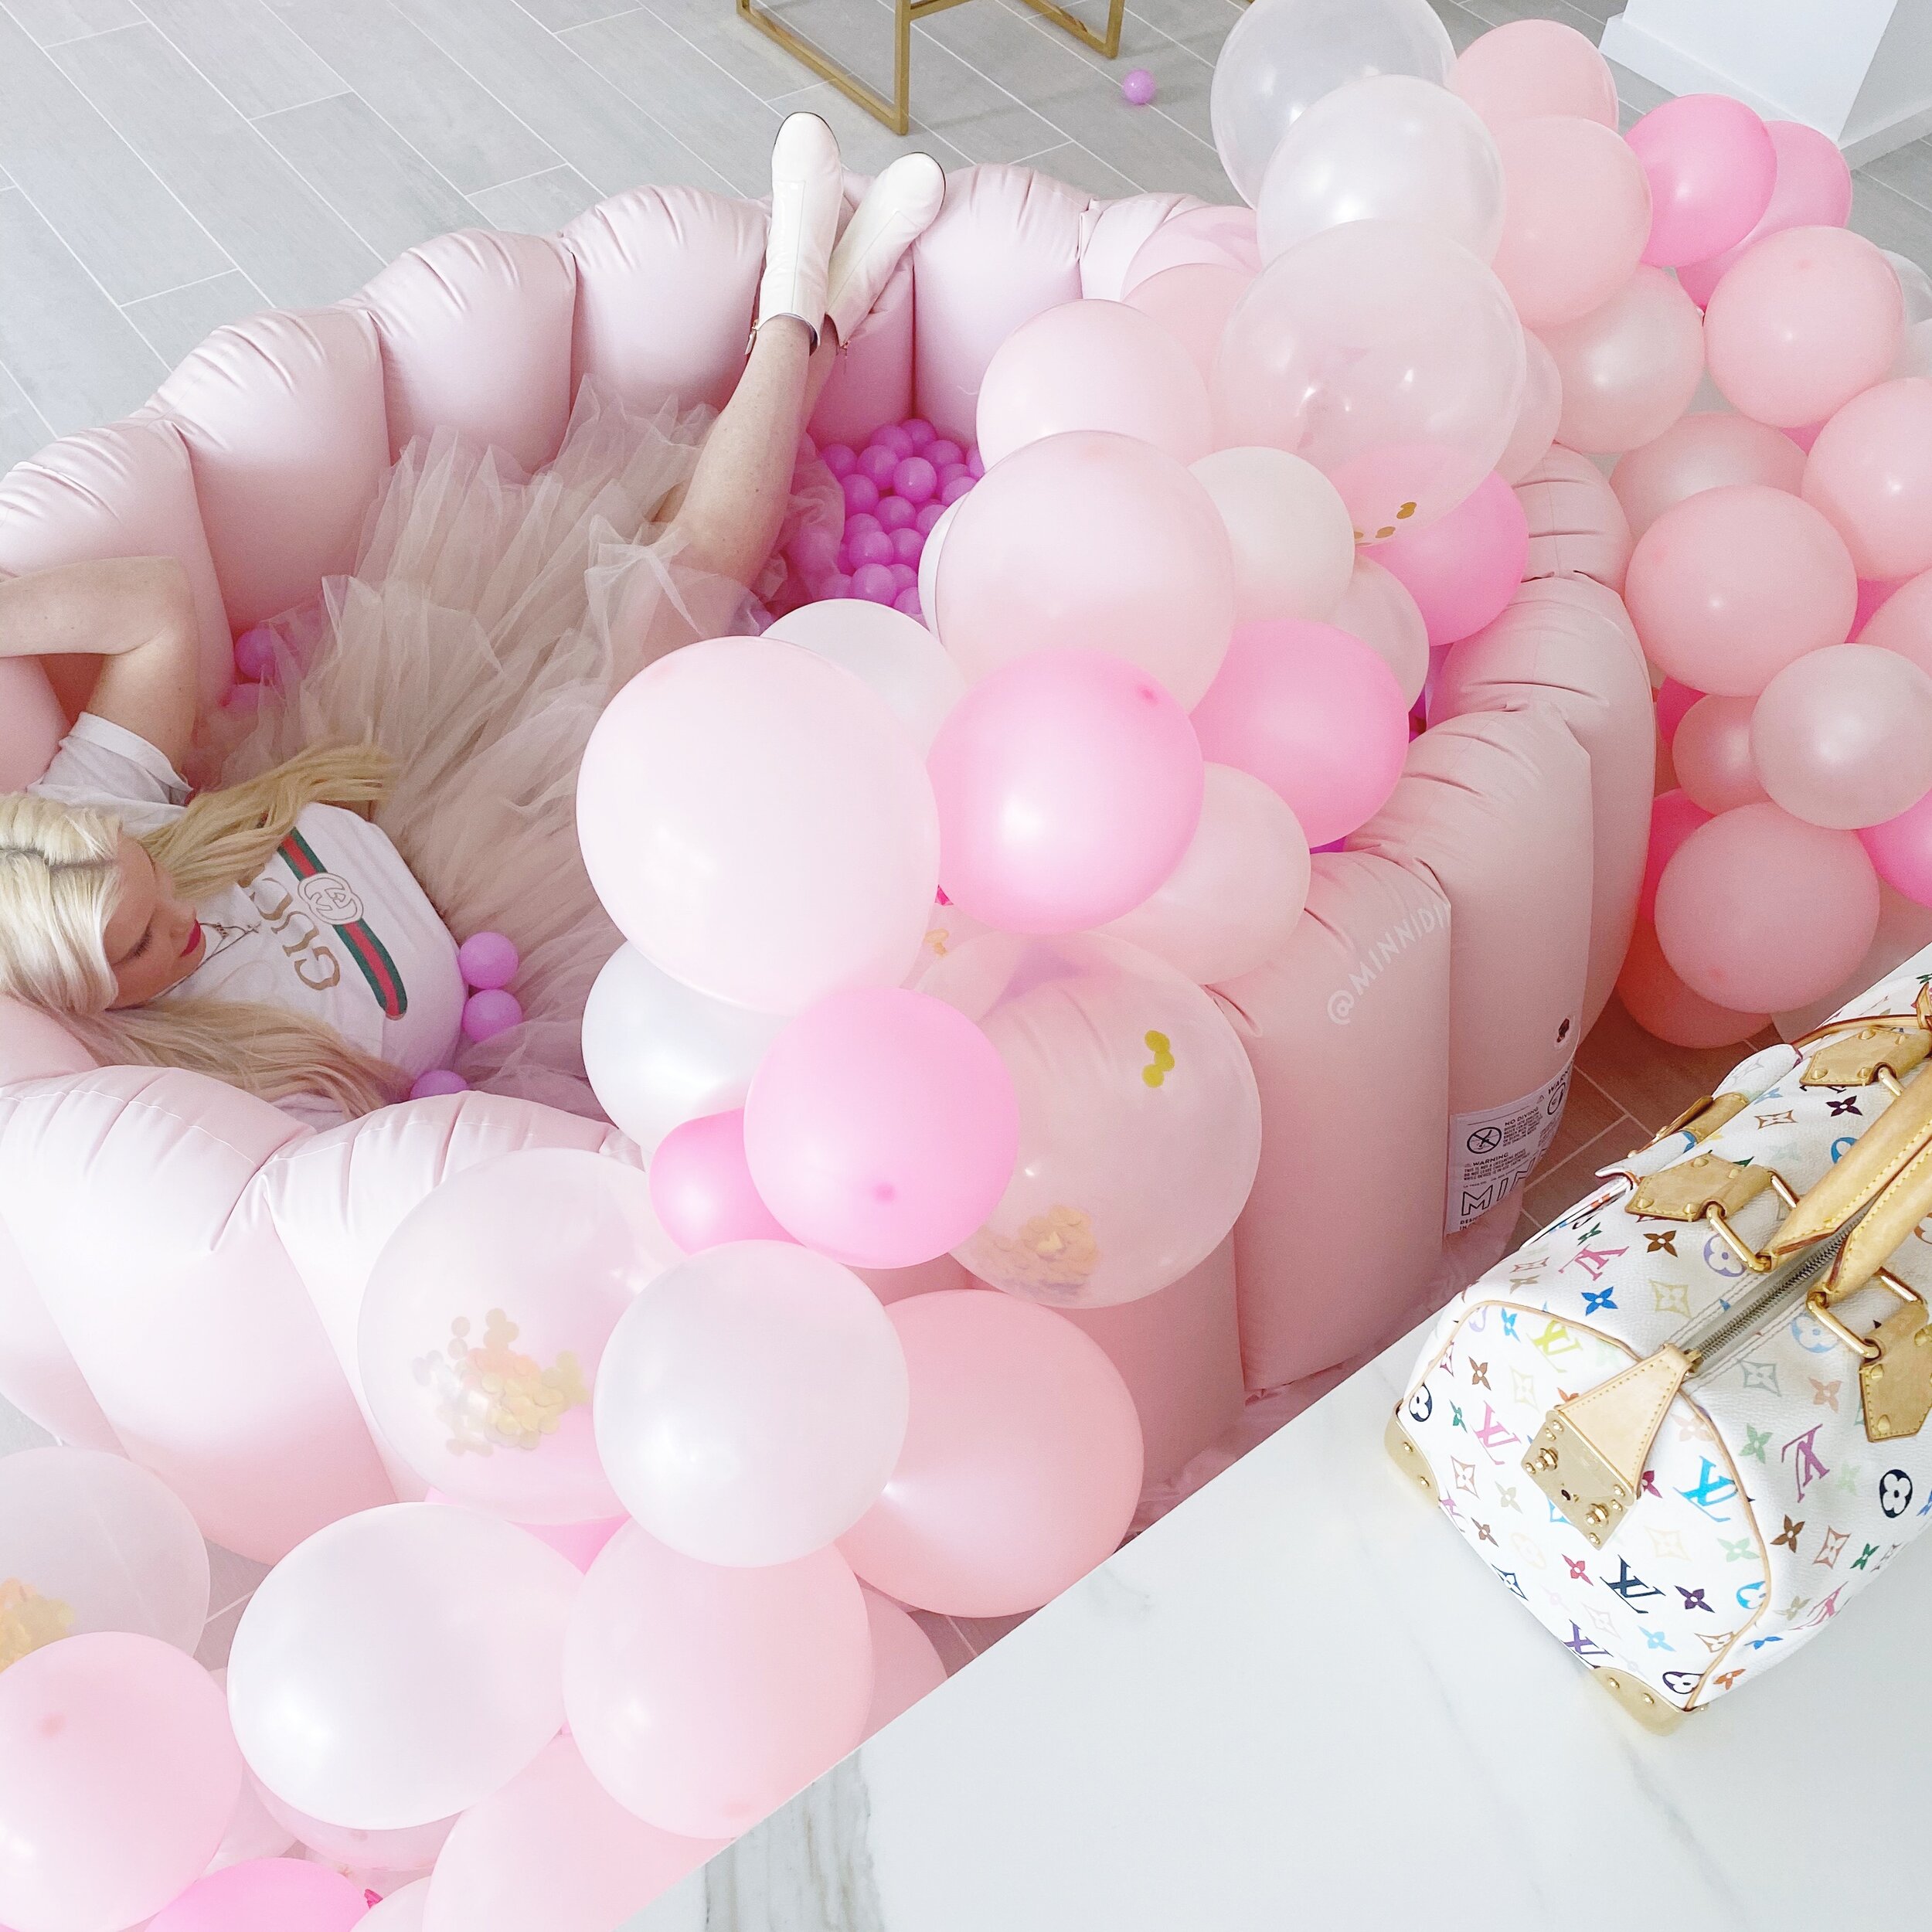 The-Caroline-Doll-Birthday-Pink-Ball-Pit-Minnidip-Inflatable-Pool-Luxury-Office-Goals-Party-Lifestyle-5.JPG